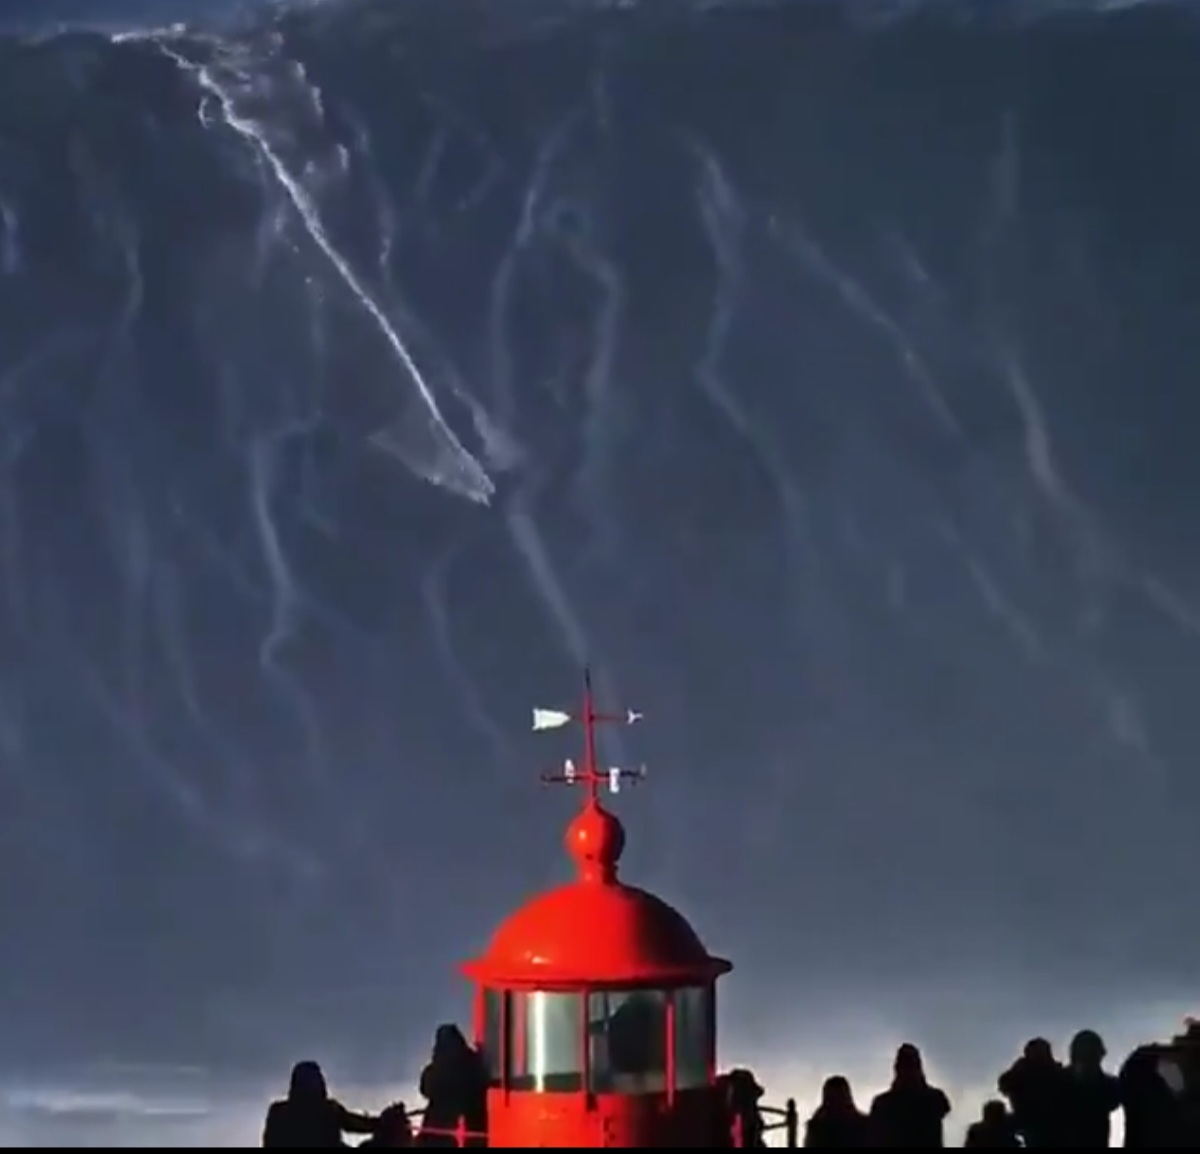 Surfer Rides Record Breaking 115 Foot Wave